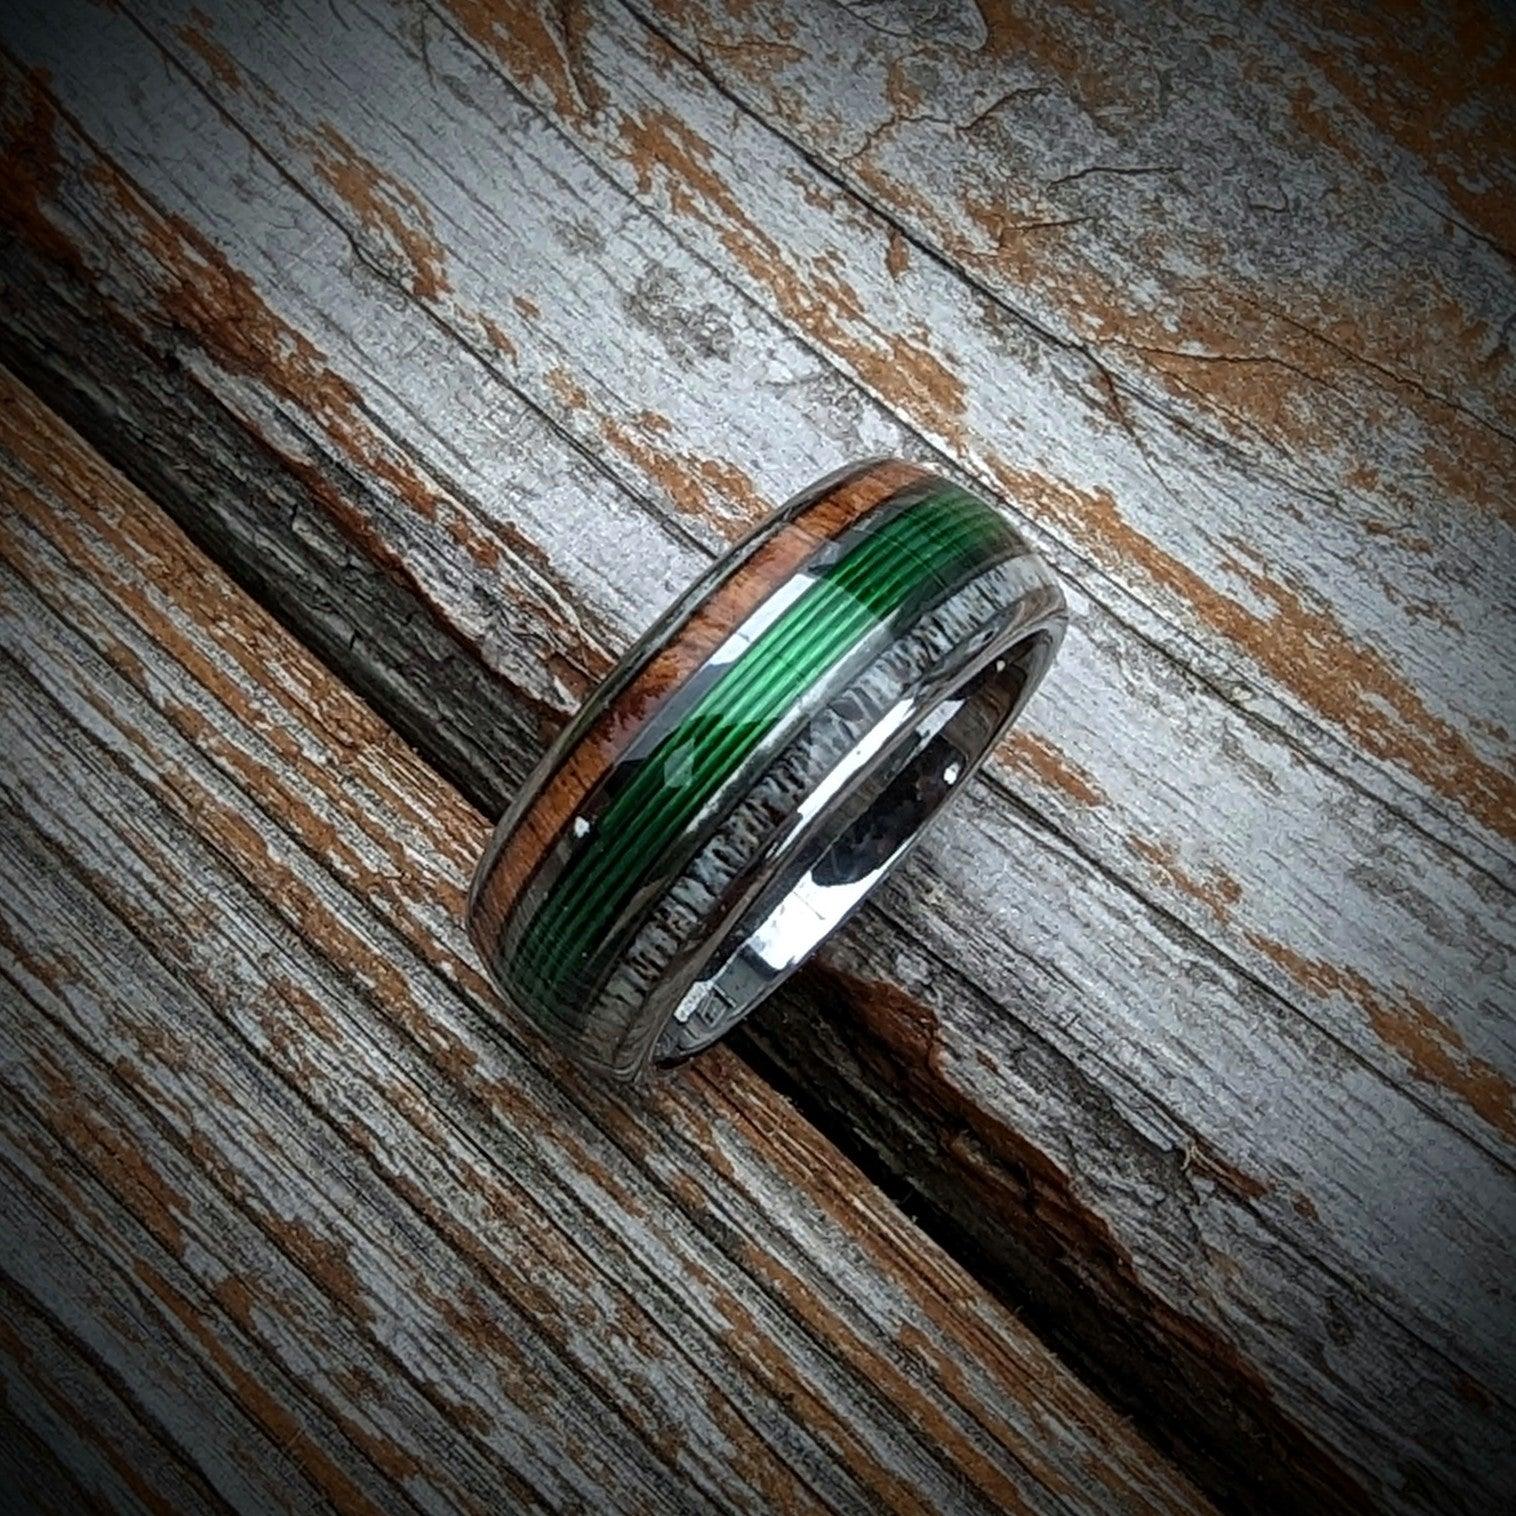 Men's wedding band made for the avid fisherman!